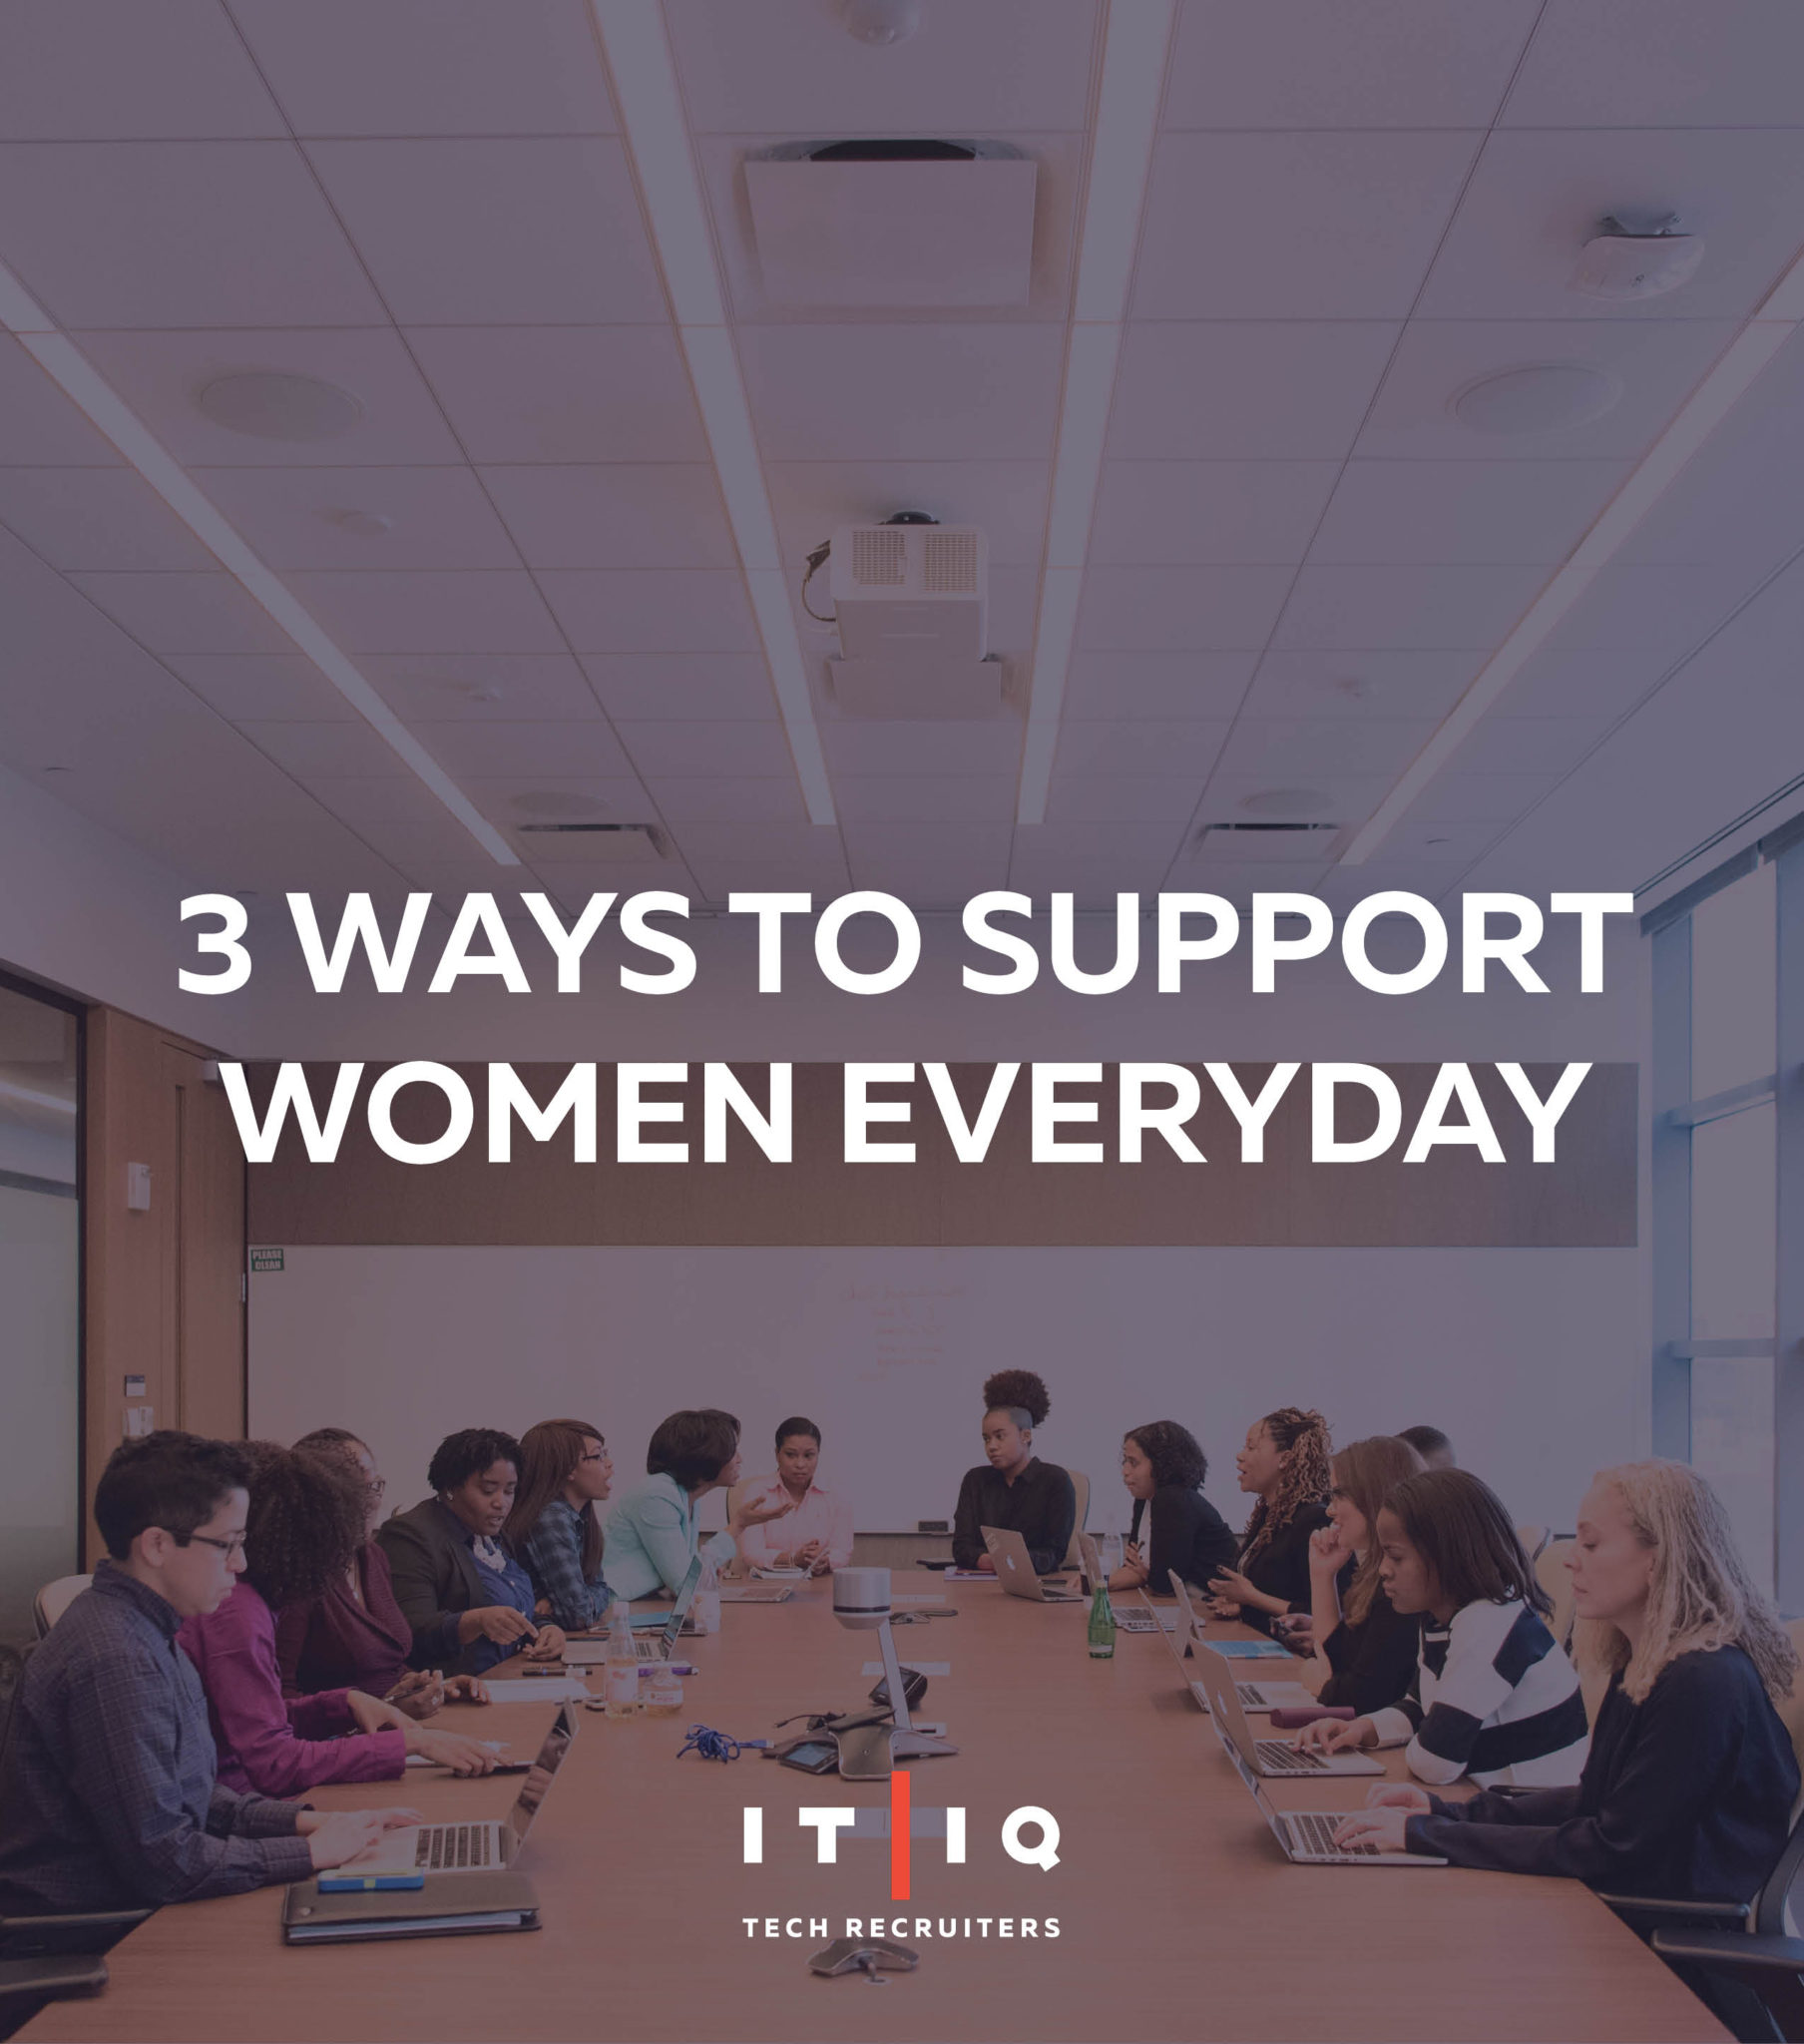 IT/IQ Tech Recruiters 3 ways to support women everyday Graphic